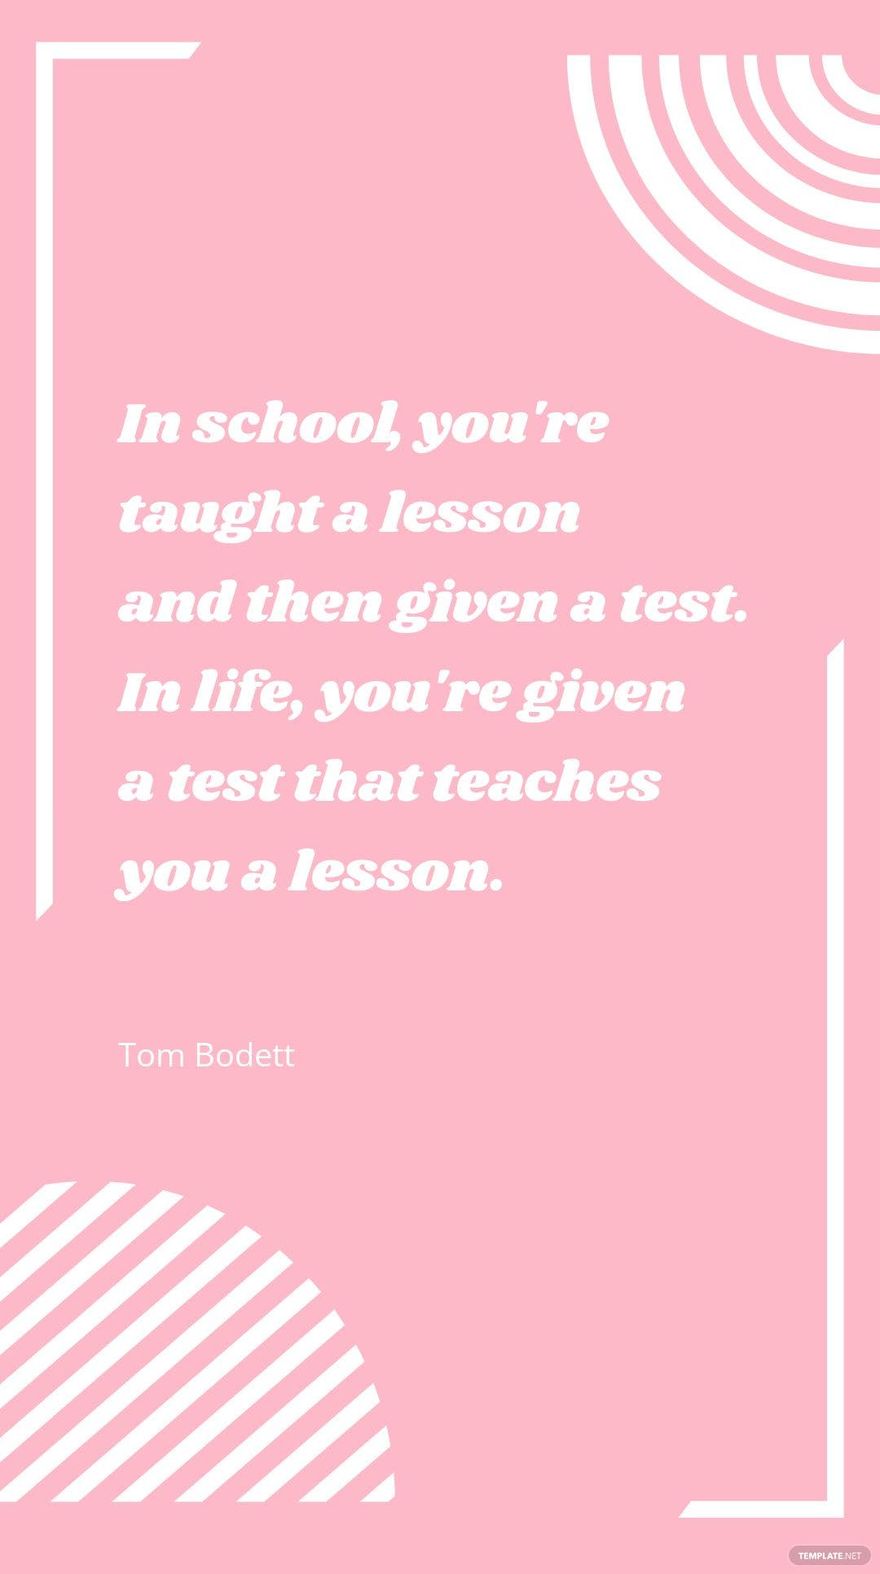 Tom Bodett - In school, you're taught a lesson and then given a test. In life, you're given a test that teaches you a lesson.